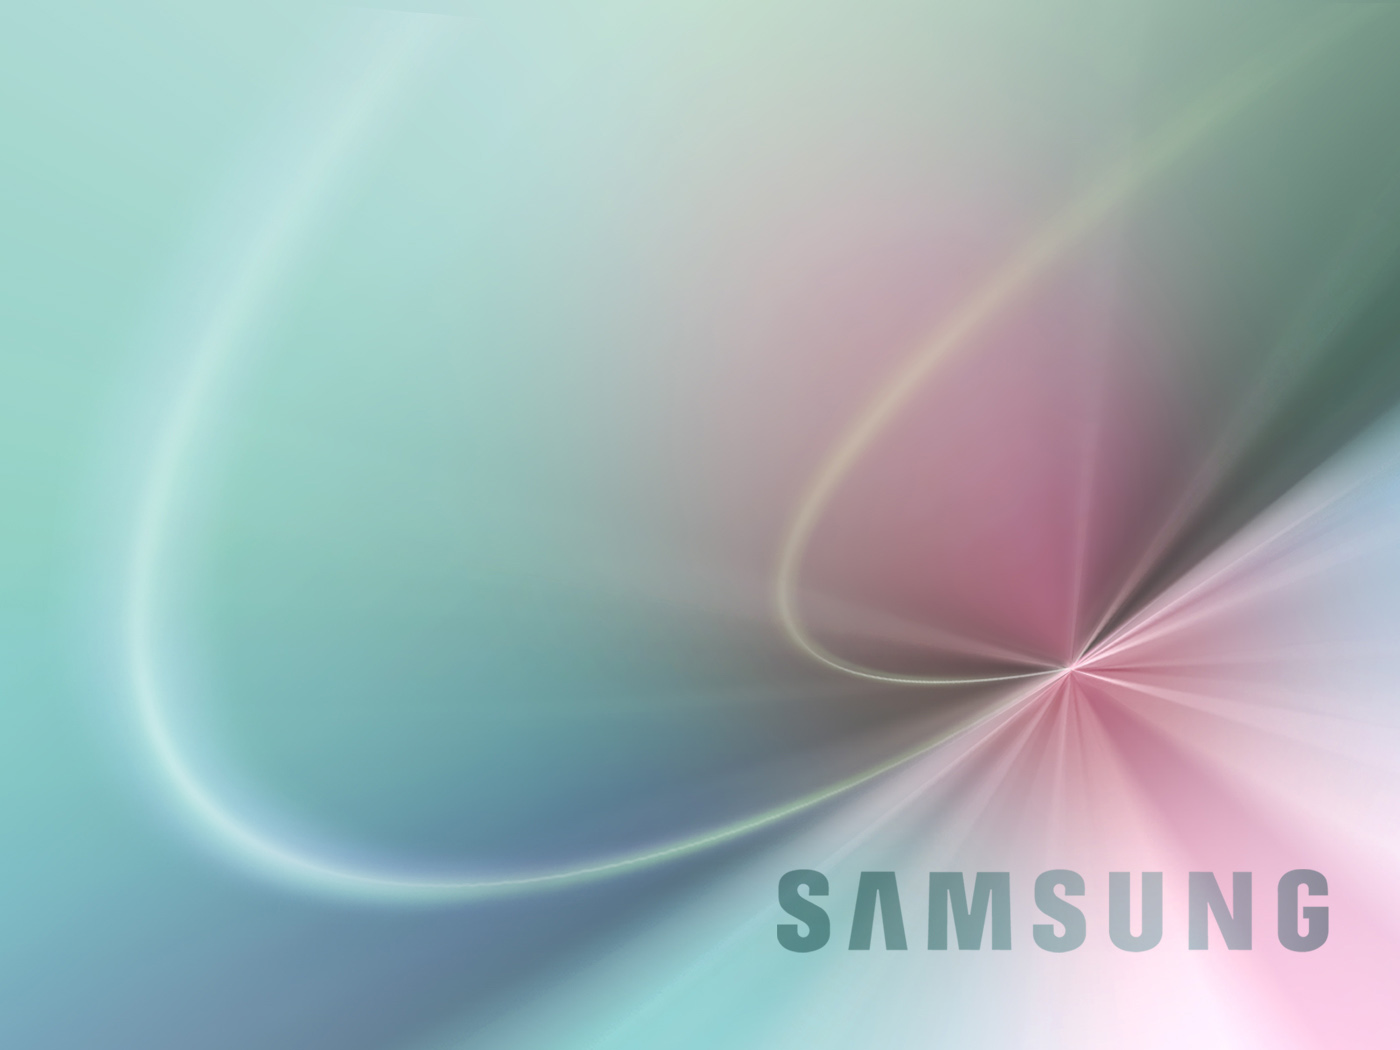 22 Hd Wallpapers For Samsung Laptop